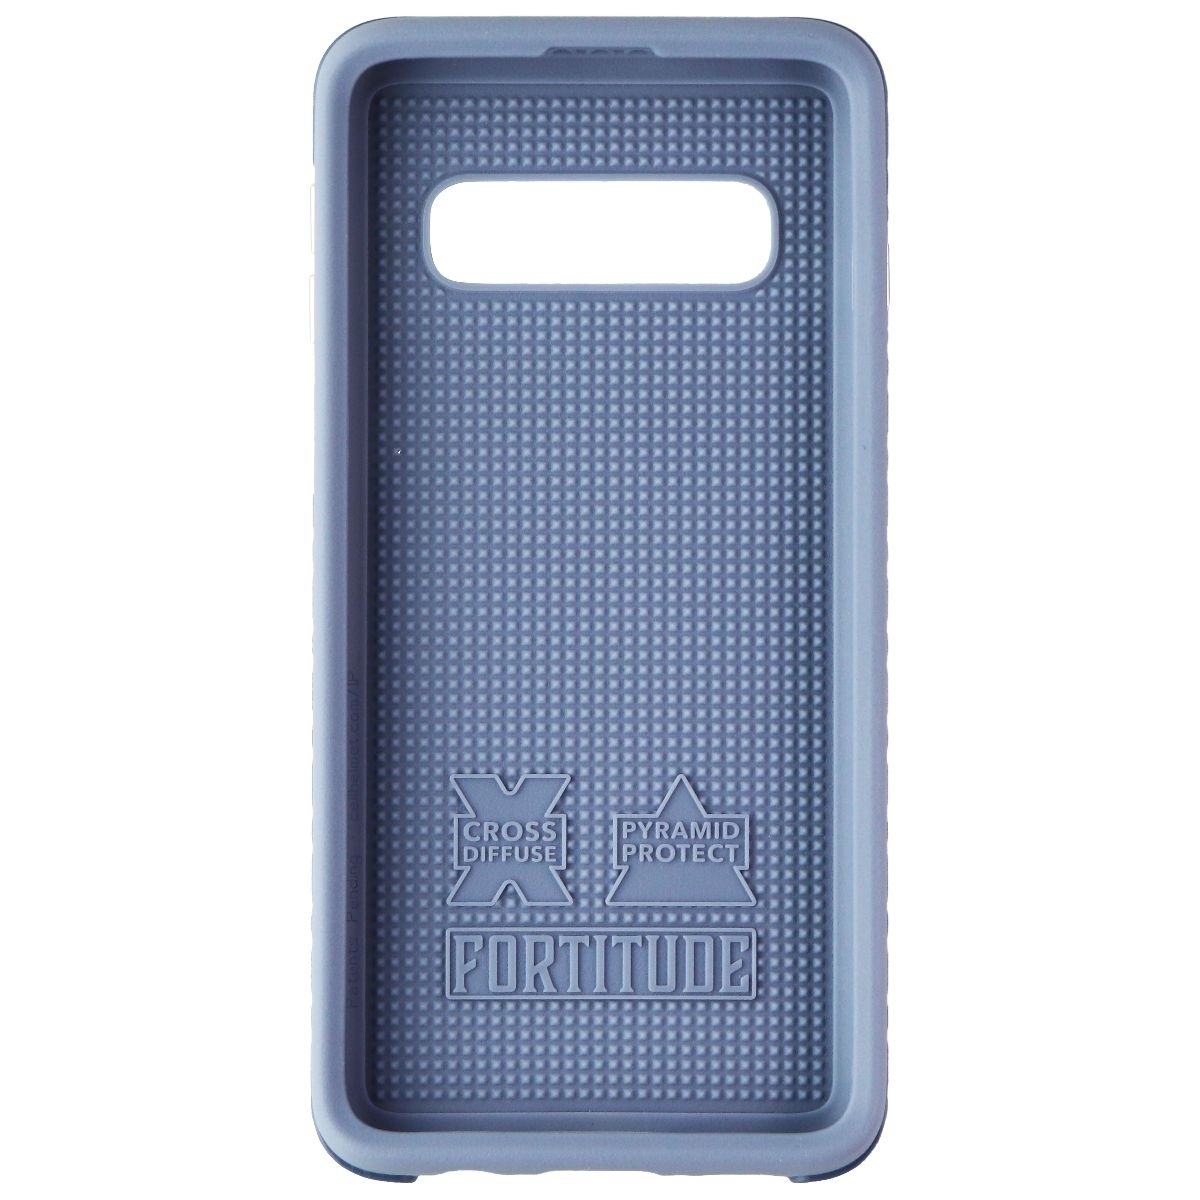 CellHelmet Fortitude PRO Series Case For Samsung Galaxy S10 - Slate Blue